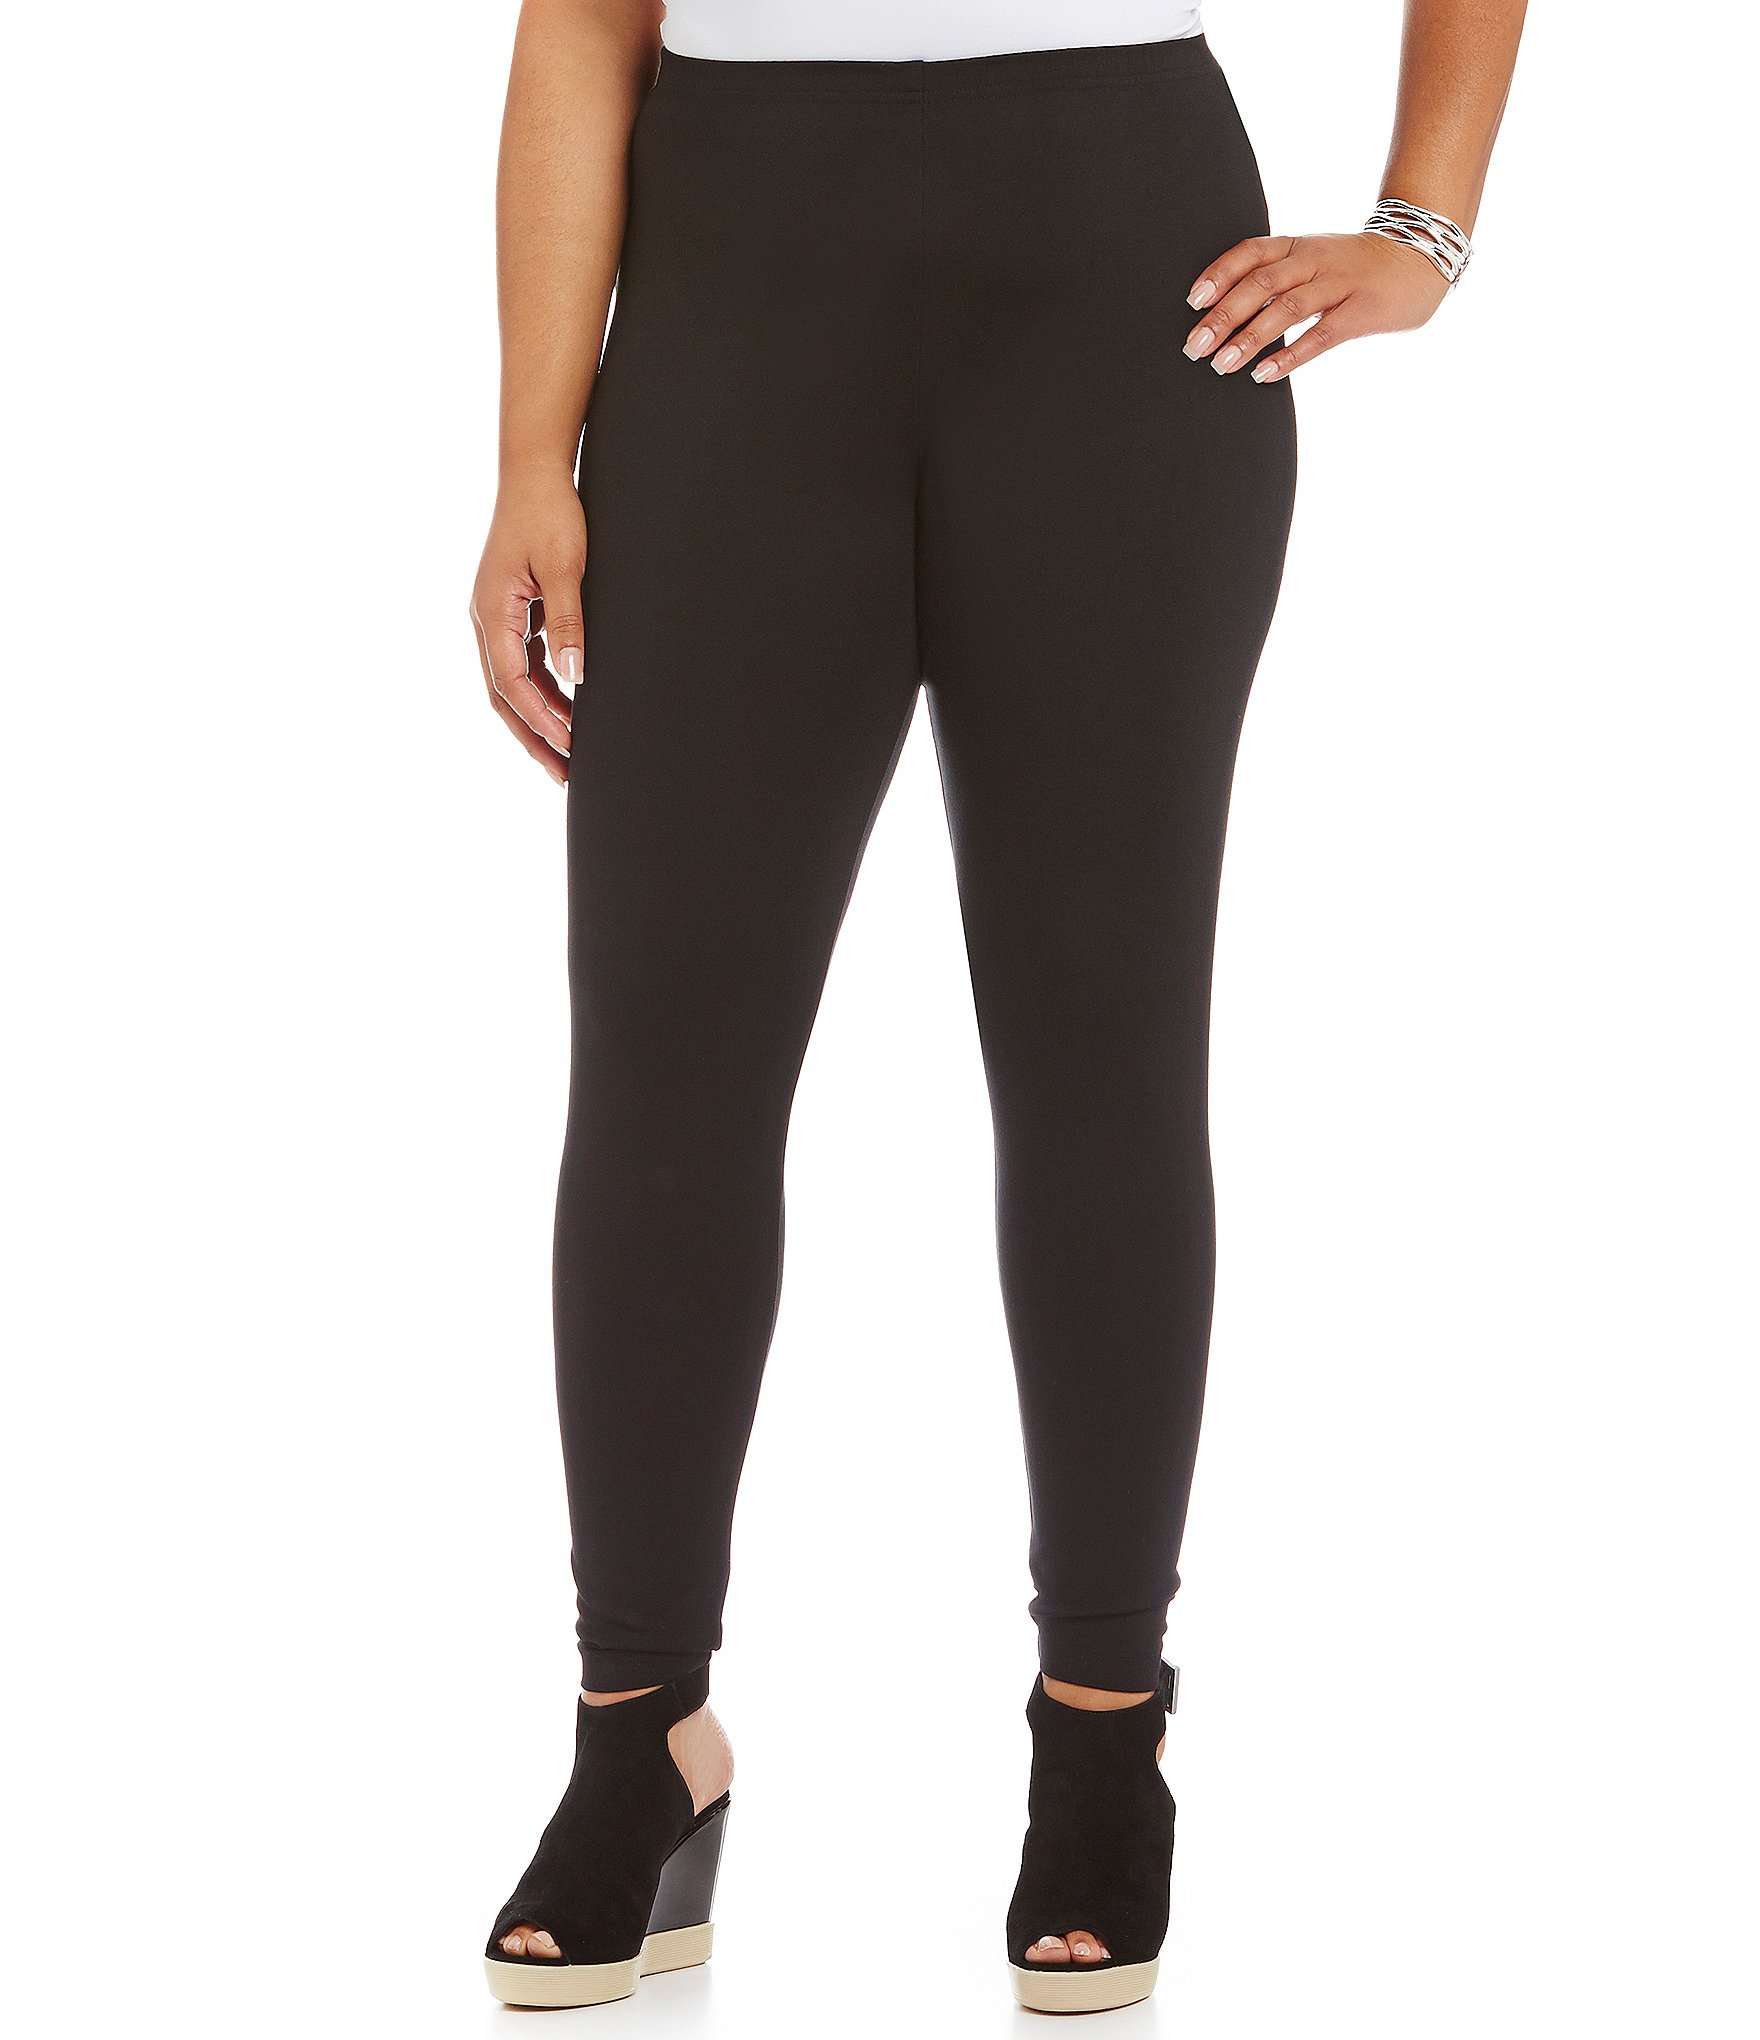  Poetic Justice Plus Size Curvy Women's Stretch Ponte Pull On Moto  Legging Black : Clothing, Shoes & Jewelry